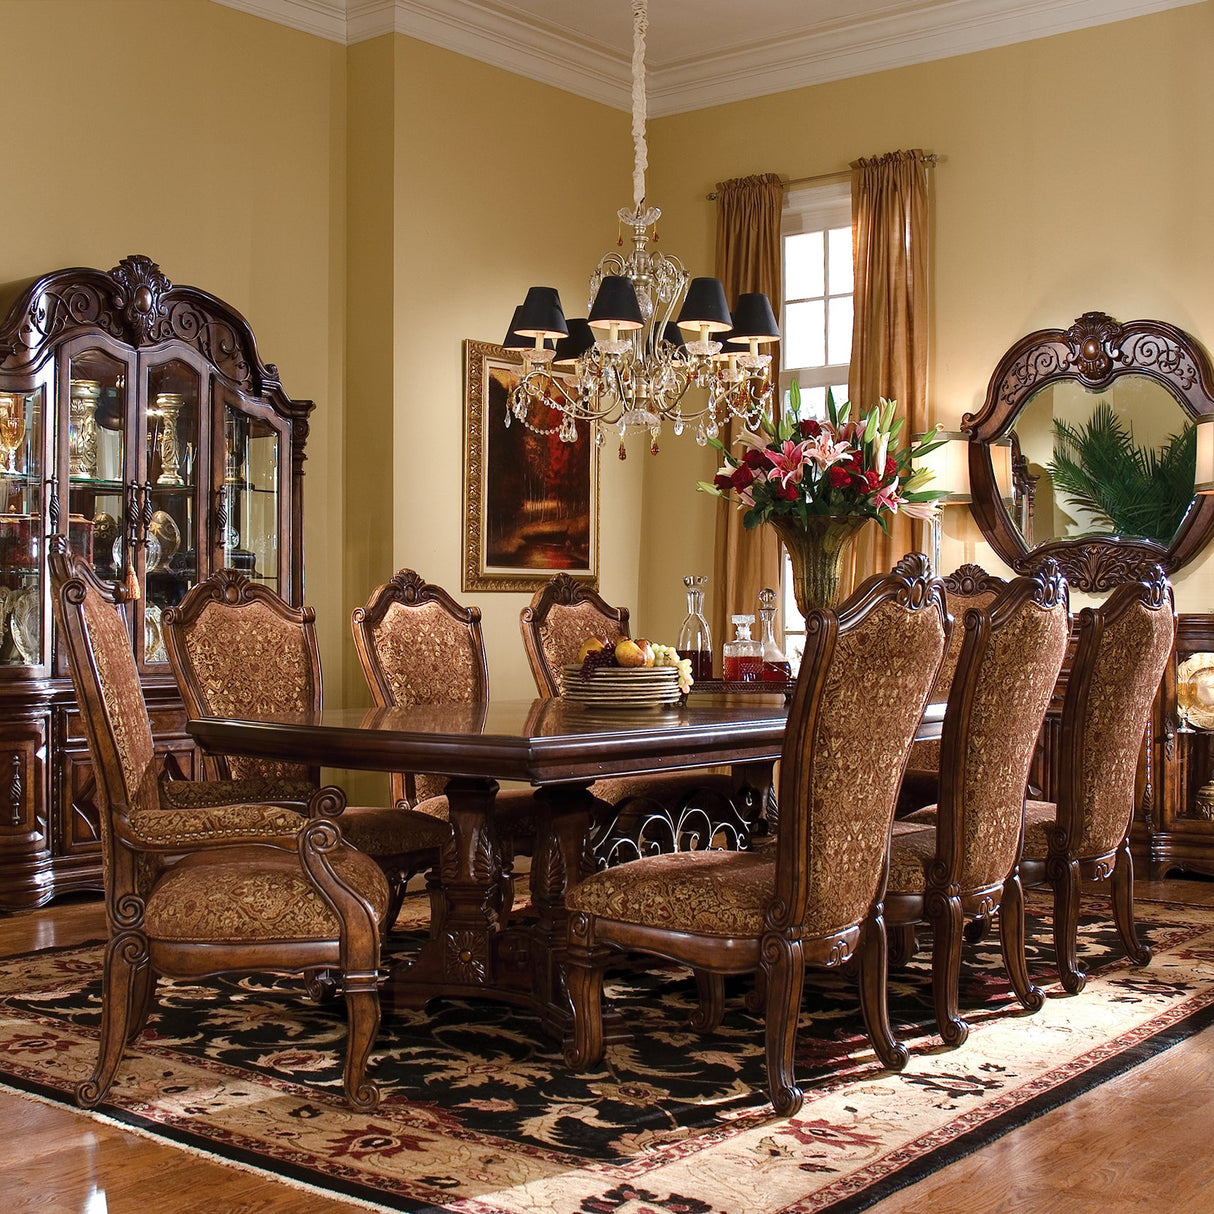 Aico Furniture - Windsor Court Rectangular Dining Table In Vintage Fruitwood - 70002L2-54